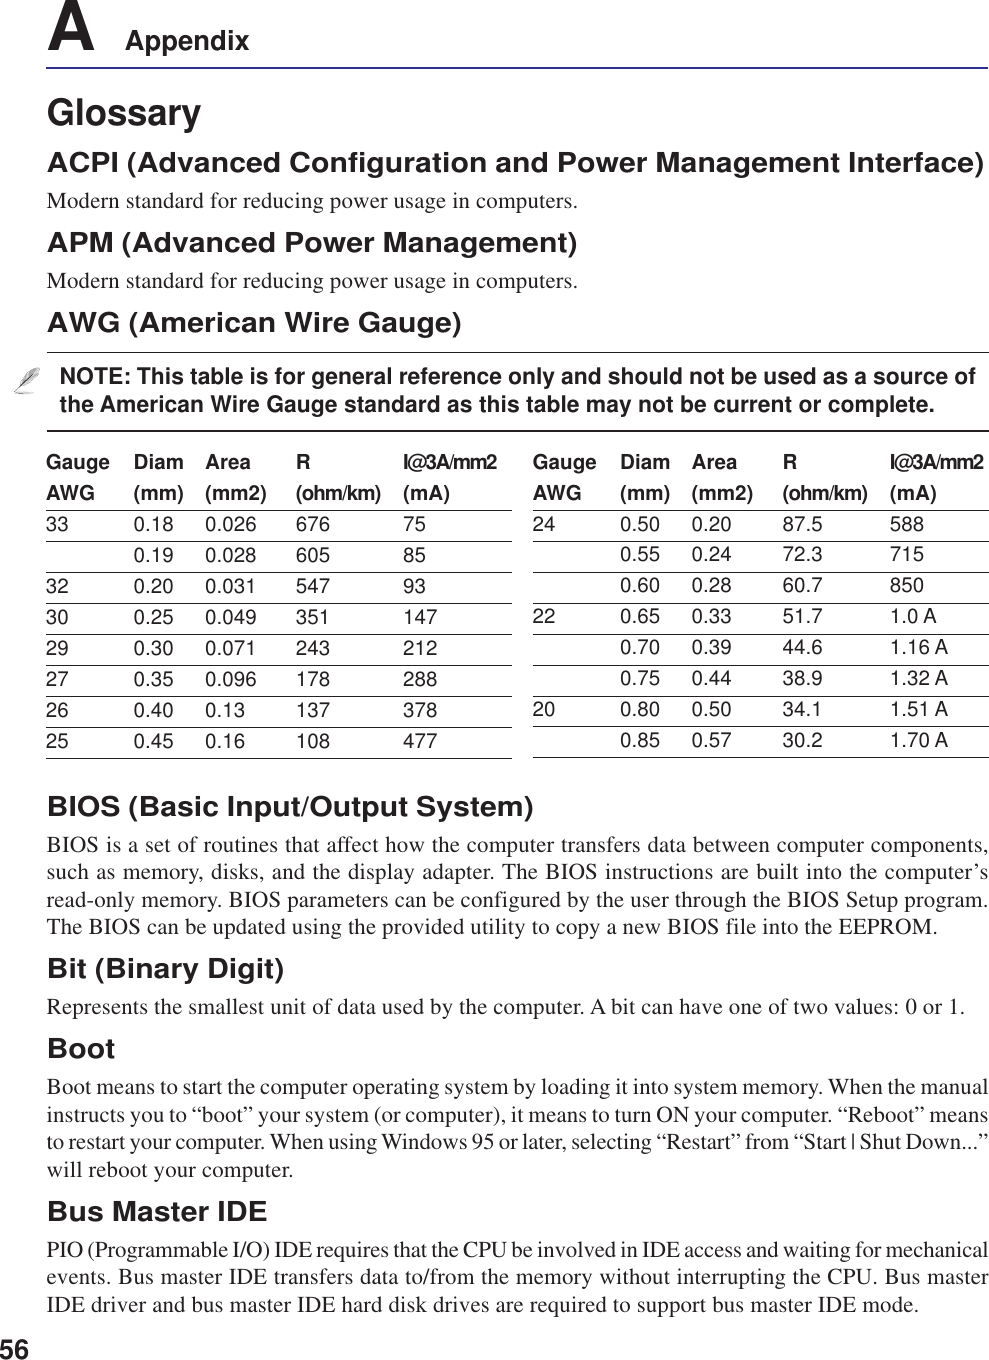 56A    AppendixGlossaryACPI (Advanced Configuration and Power Management Interface)Modern standard for reducing power usage in computers.APM (Advanced Power Management)Modern standard for reducing power usage in computers.AWG (American Wire Gauge)NOTE: This table is for general reference only and should not be used as a source ofthe American Wire Gauge standard as this table may not be current or complete.Gauge Diam Area R I@3A/mm2AWG (mm) (mm2) (ohm/km) (mA)33 0.18 0.026 676 750.19 0.028 605 8532 0.20 0.031 547 9330 0.25 0.049 351 14729 0.30 0.071 243 21227 0.35 0.096 178 28826 0.40 0.13 137 37825 0.45 0.16 108 477Gauge Diam Area R I@3A/mm2AWG (mm) (mm2) (ohm/km) (mA)24 0.50 0.20 87.5 5880.55 0.24 72.3 7150.60 0.28 60.7 85022 0.65 0.33 51.7 1.0 A0.70 0.39 44.6 1.16 A0.75 0.44 38.9 1.32 A20 0.80 0.50 34.1 1.51 A0.85 0.57 30.2 1.70 ABIOS (Basic Input/Output System)BIOS is a set of routines that affect how the computer transfers data between computer components,such as memory, disks, and the display adapter. The BIOS instructions are built into the computer’sread-only memory. BIOS parameters can be configured by the user through the BIOS Setup program.The BIOS can be updated using the provided utility to copy a new BIOS file into the EEPROM.Bit (Binary Digit)Represents the smallest unit of data used by the computer. A bit can have one of two values: 0 or 1.BootBoot means to start the computer operating system by loading it into system memory. When the manualinstructs you to “boot” your system (or computer), it means to turn ON your computer. “Reboot” meansto restart your computer. When using Windows 95 or later, selecting “Restart” from “Start | Shut Down...”will reboot your computer.Bus Master IDEPIO (Programmable I/O) IDE requires that the CPU be involved in IDE access and waiting for mechanicalevents. Bus master IDE transfers data to/from the memory without interrupting the CPU. Bus masterIDE driver and bus master IDE hard disk drives are required to support bus master IDE mode.